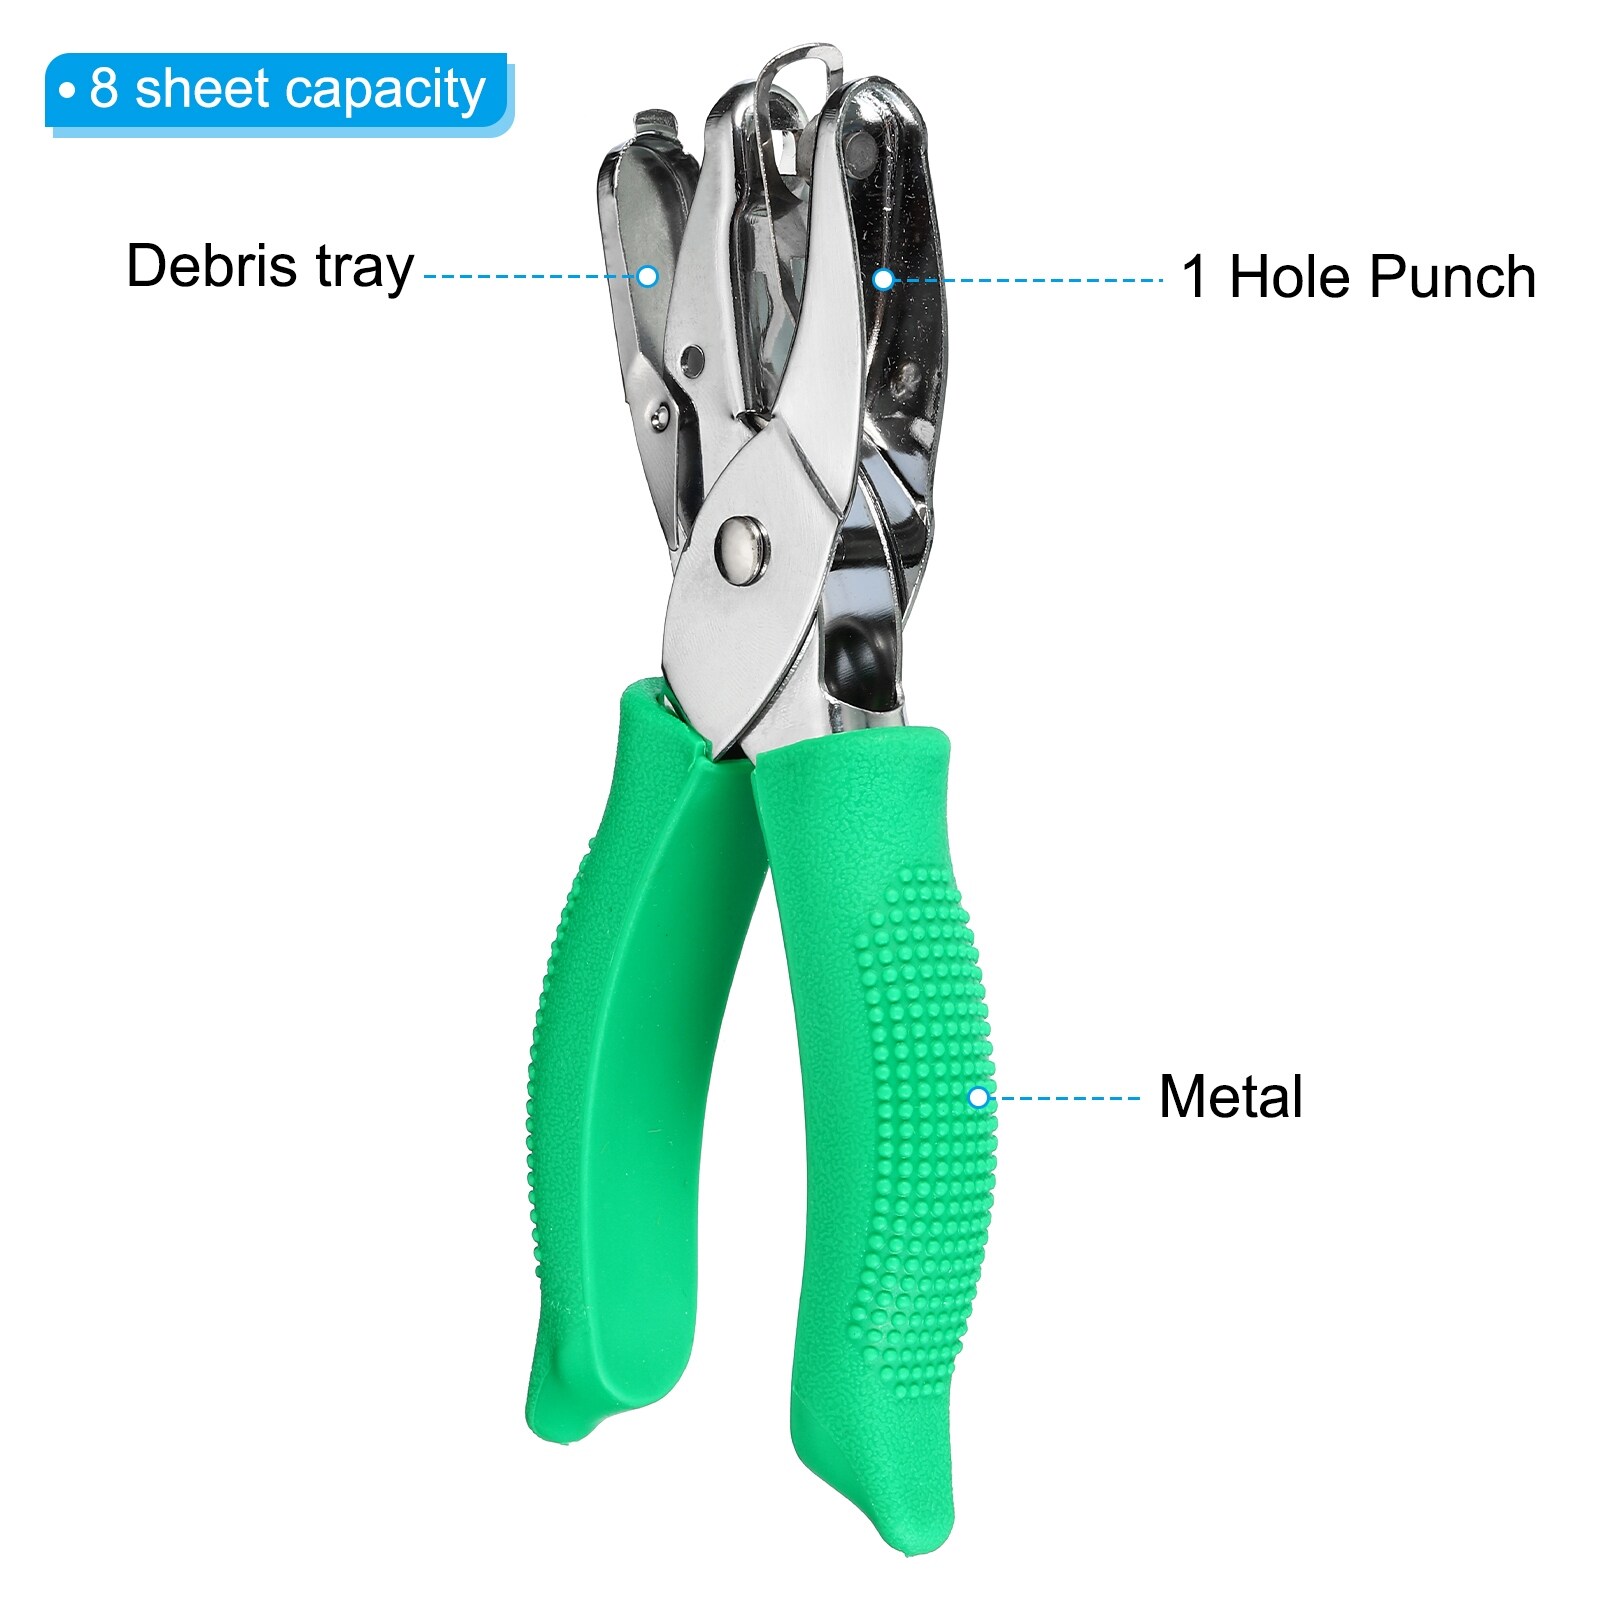 0.2 Single Hole Punch Handheld Hole Puncher with Soft Grip Square Shape,  Green